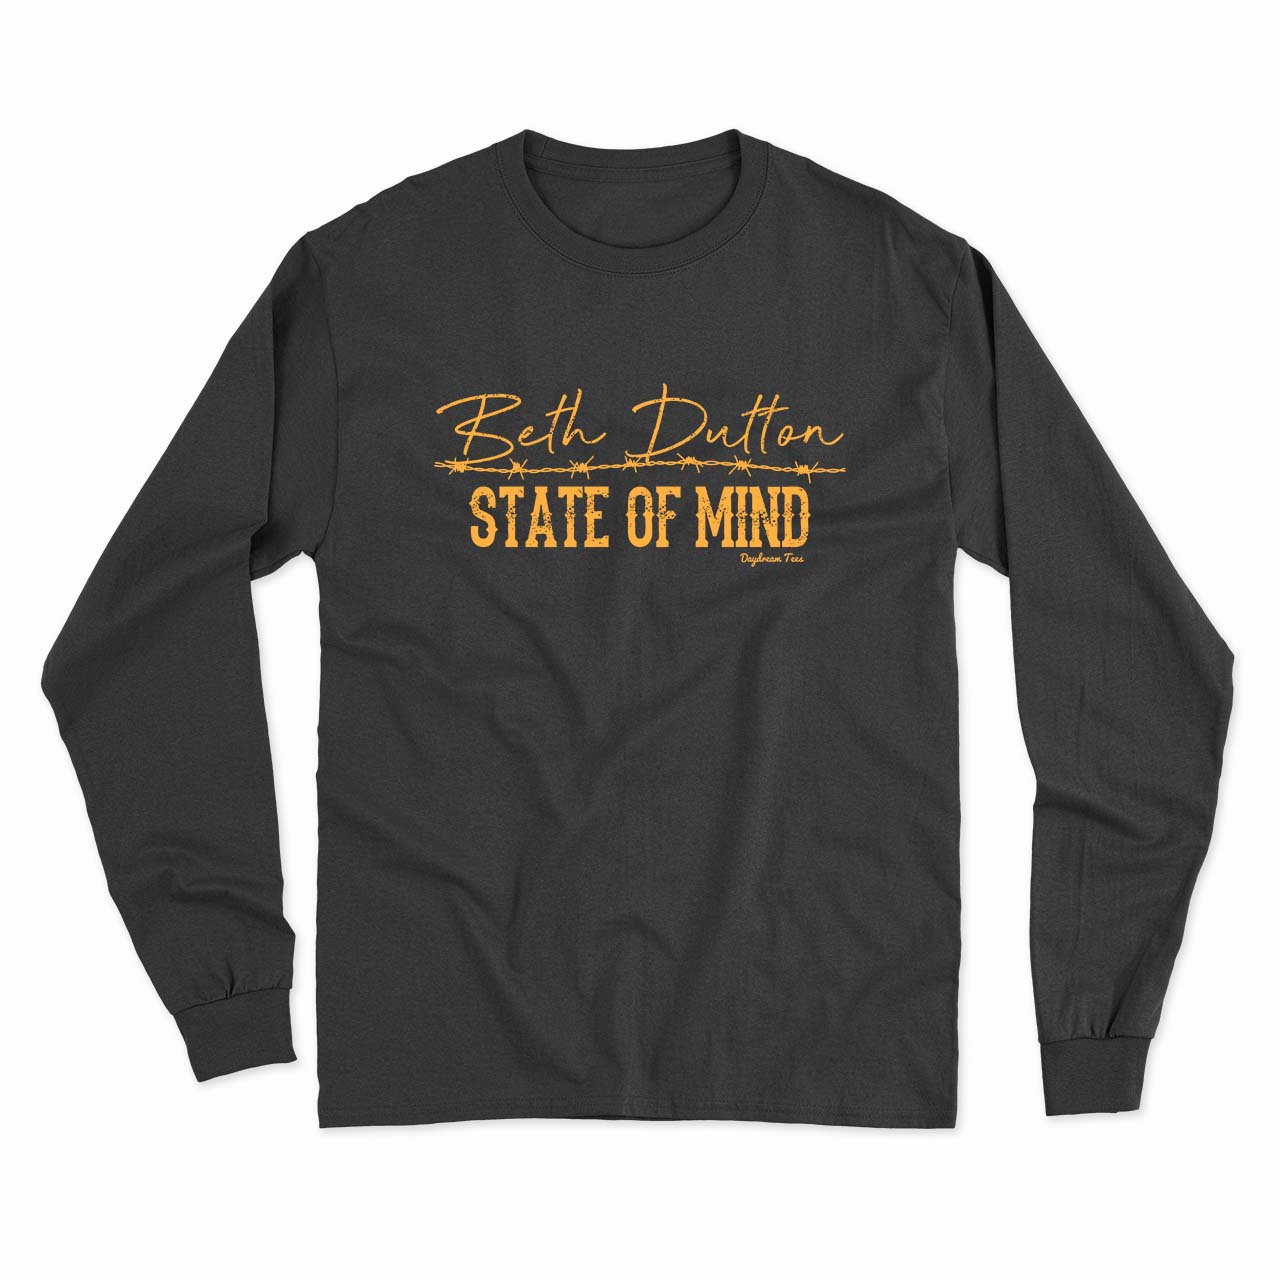 Daydream Tees Beth Dutton State of Mind Long Sleeve